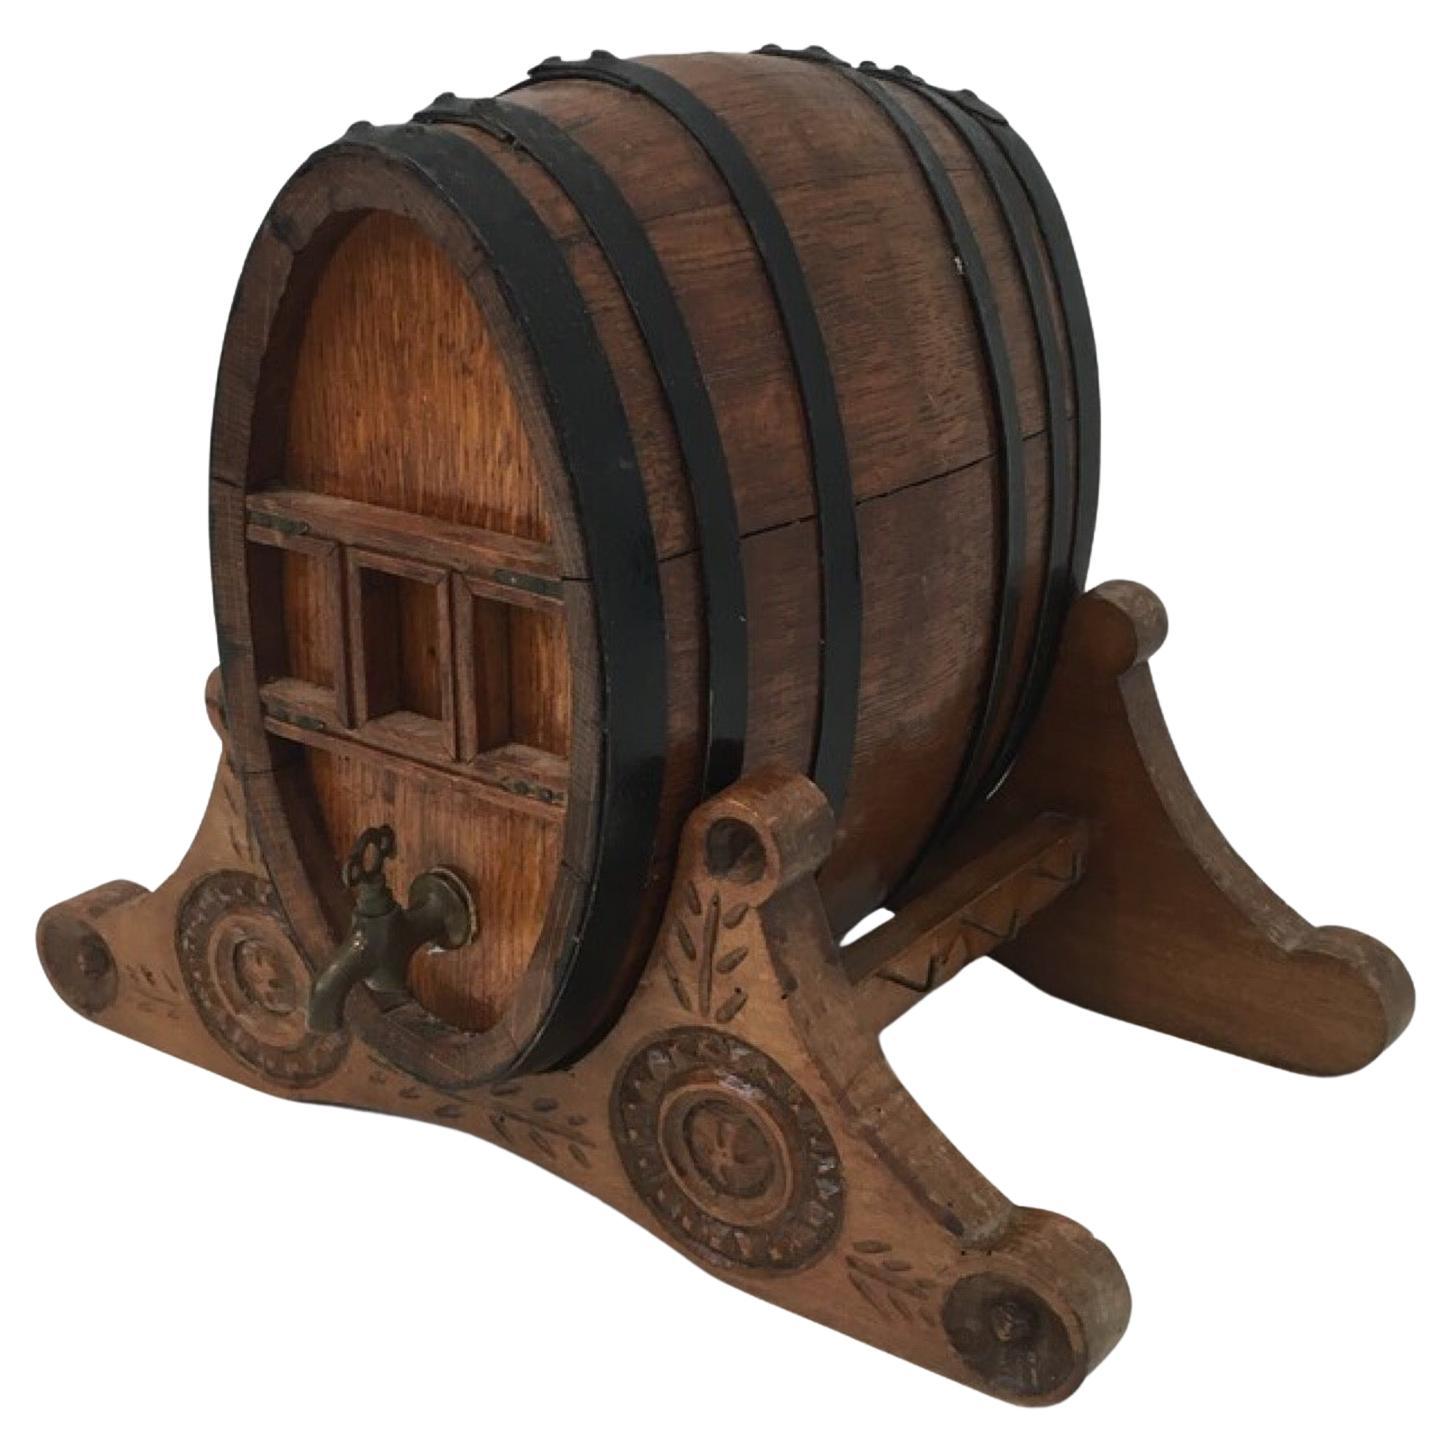 Wine Decanter Presenting a Small Wine Barrel with Brass Tap. French Folk Art